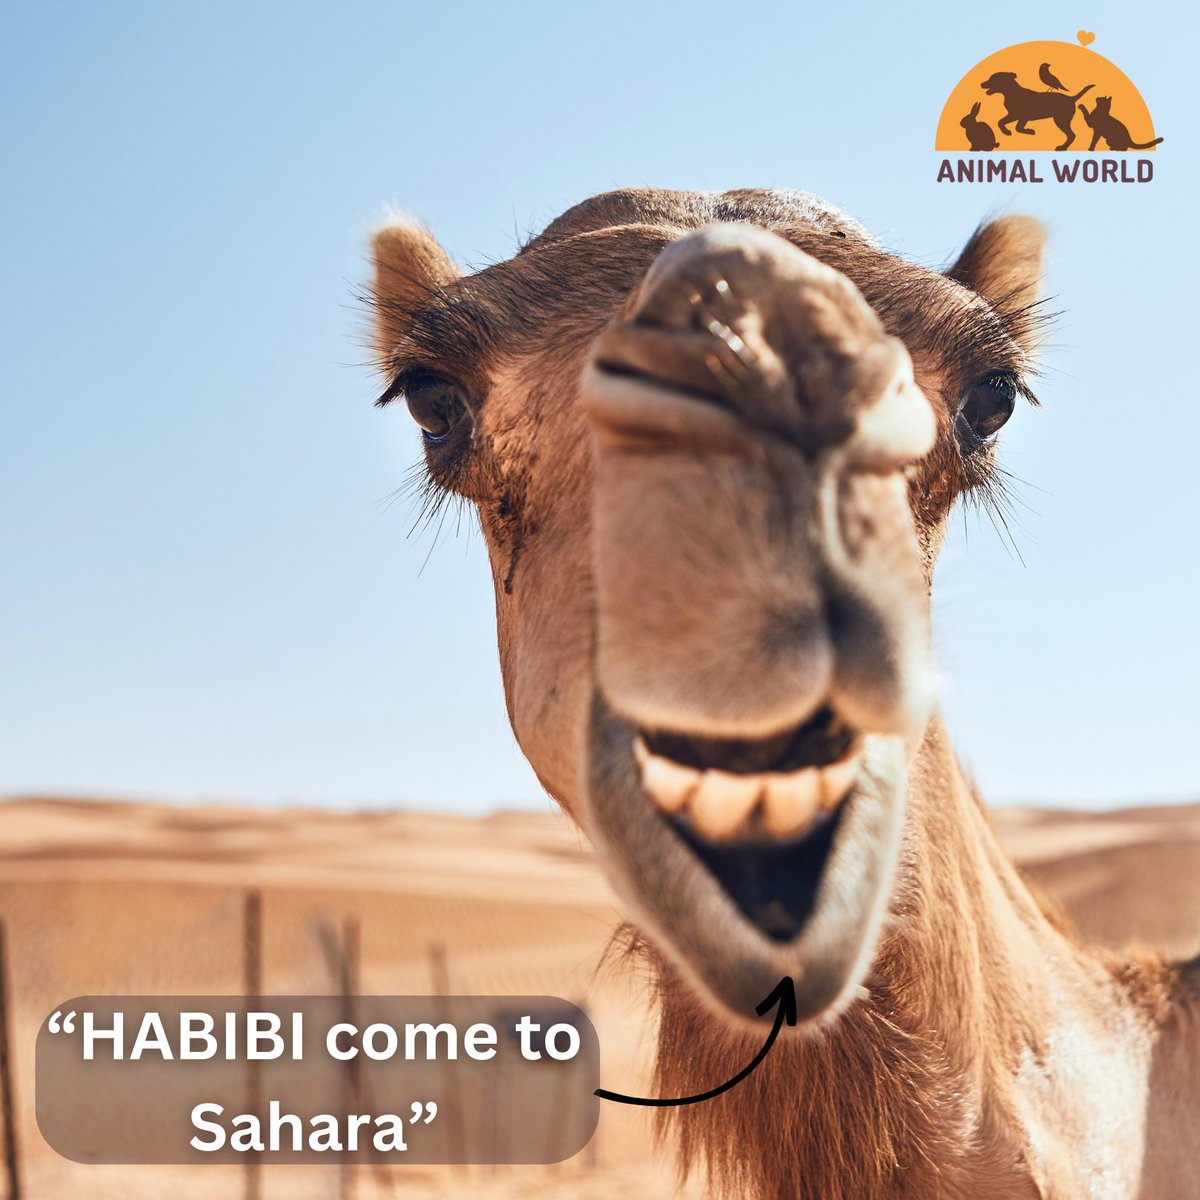 🐫 'Hey there, habibi! 🌵 The Sahara's calling, and it's time for a sand-tastic adventure! Pack your sunscreen and let's make some dunes-day memories! 🌞🏜️ #CamelAdventures #SaharaSquad #HabibiInTheDesert #TravelGoals #animalworldx #animalworld' 🐪